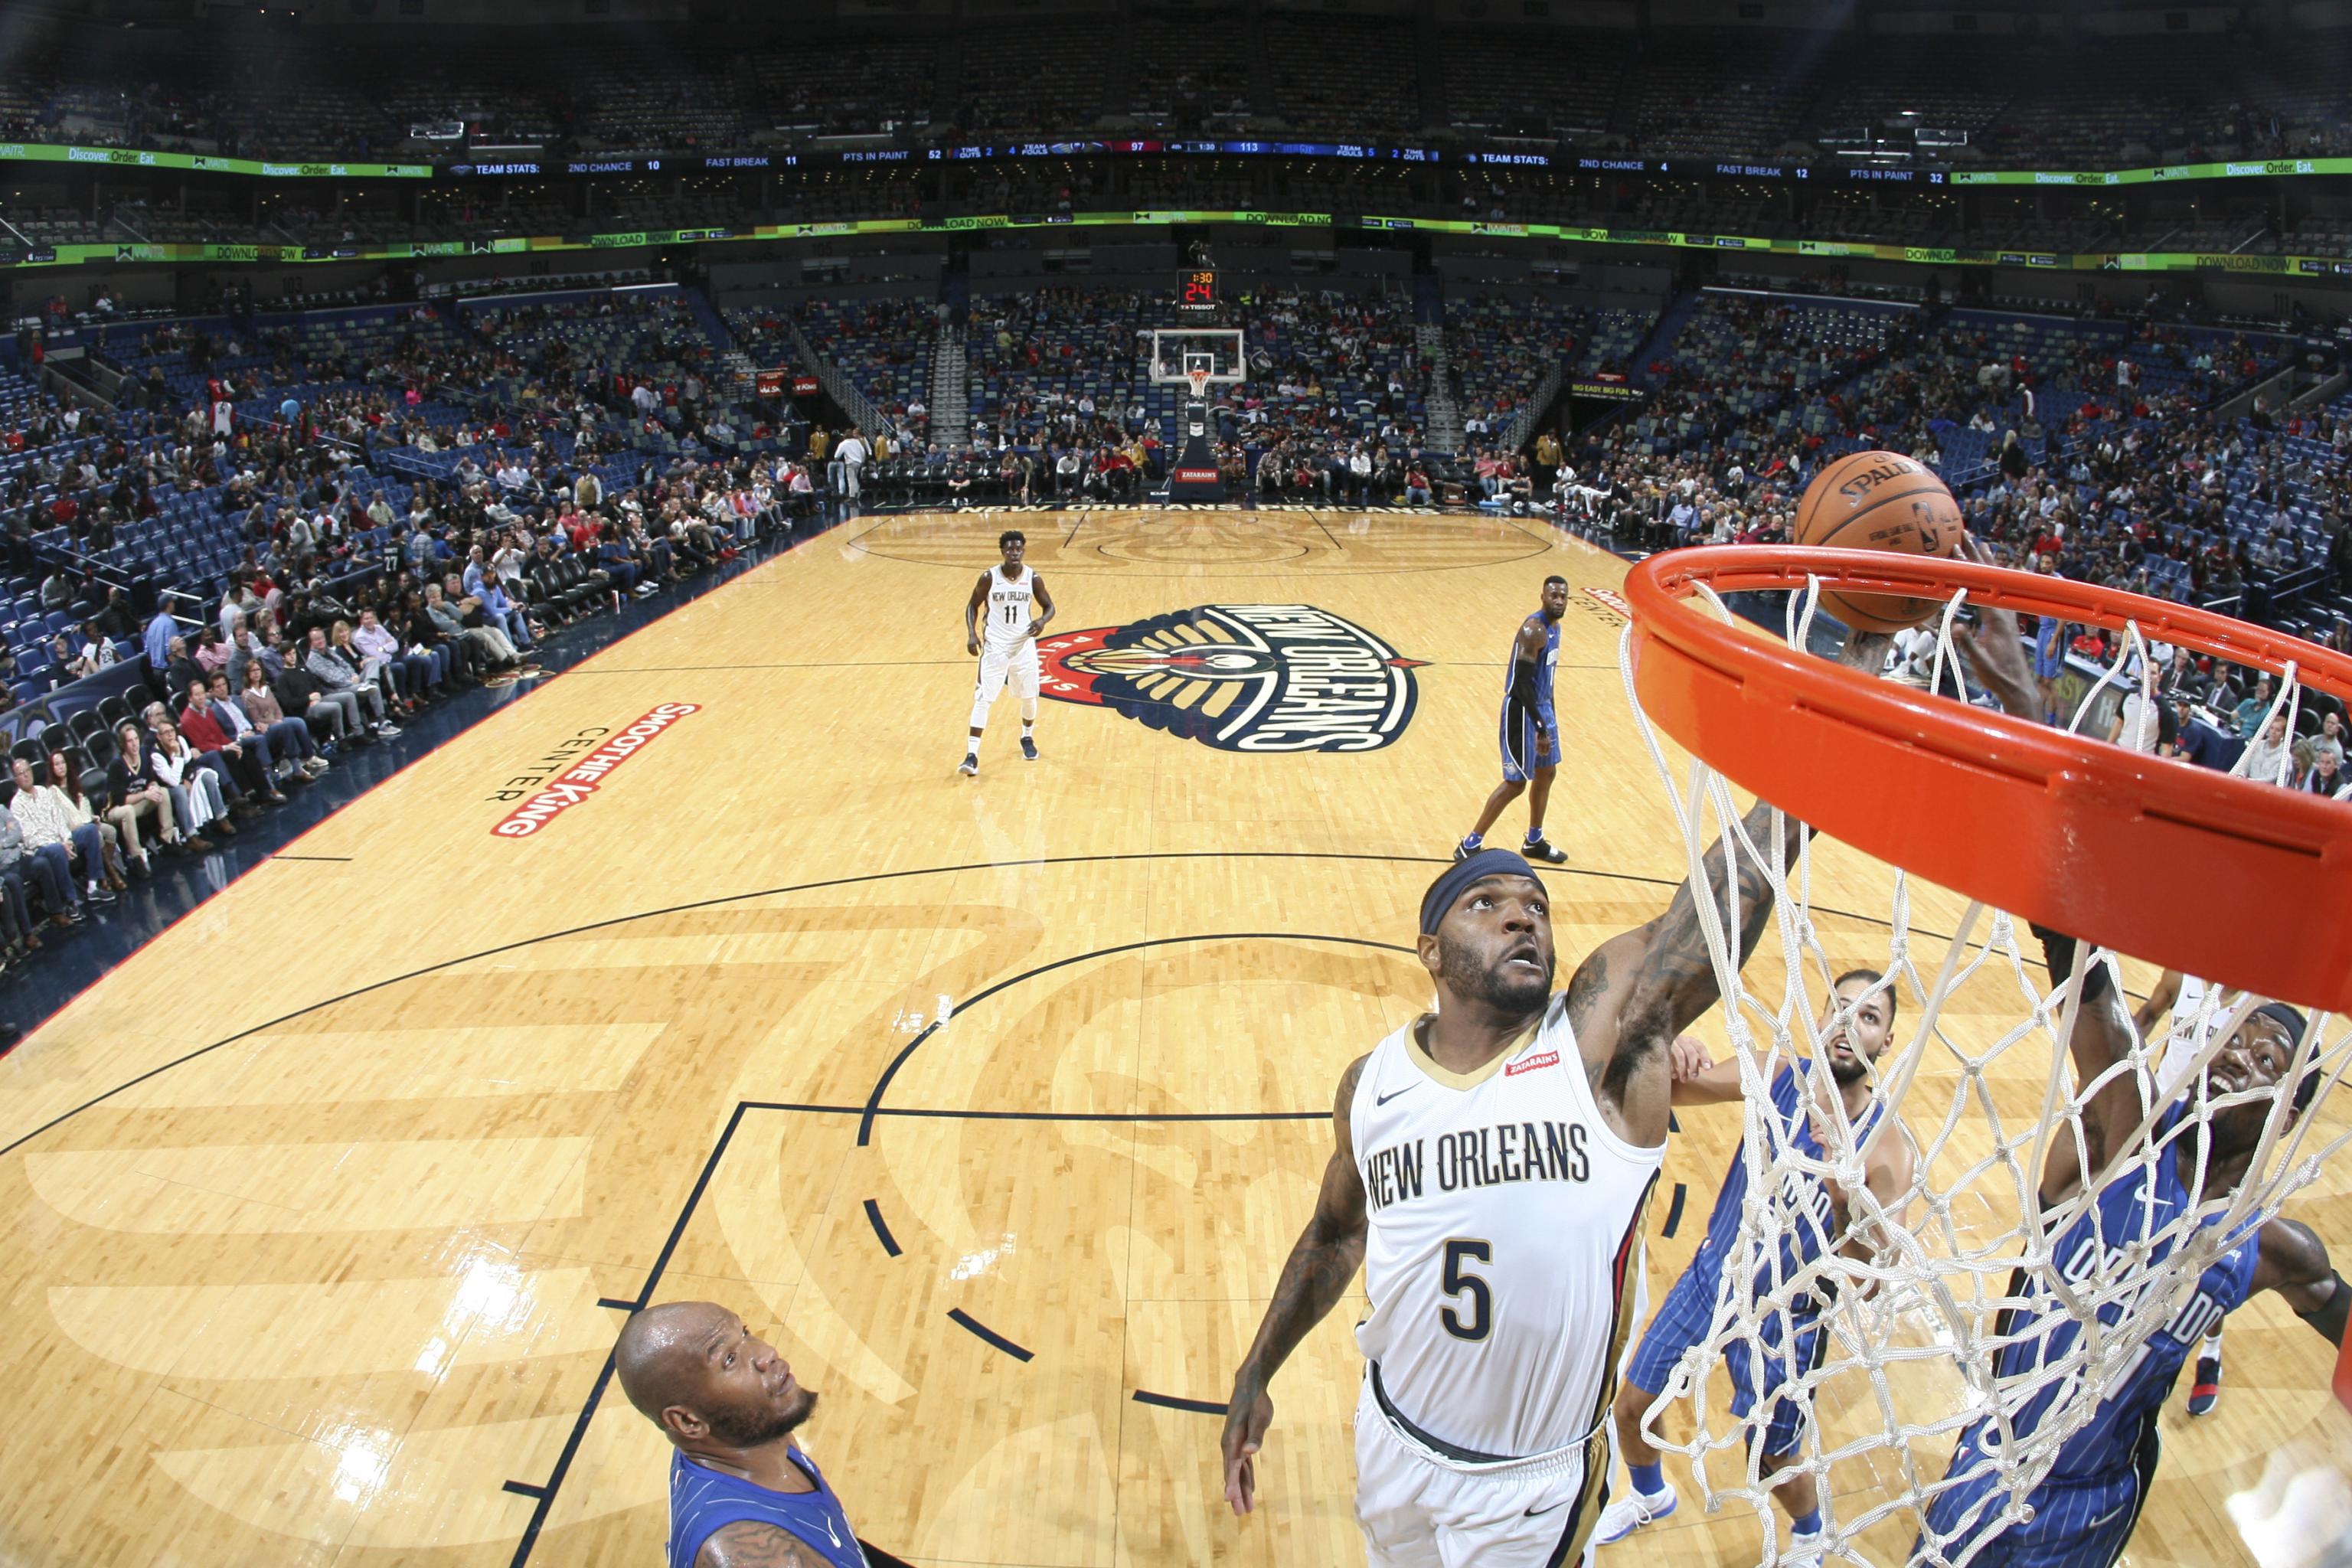 Five things to know about Pelicans forward Josh Smith